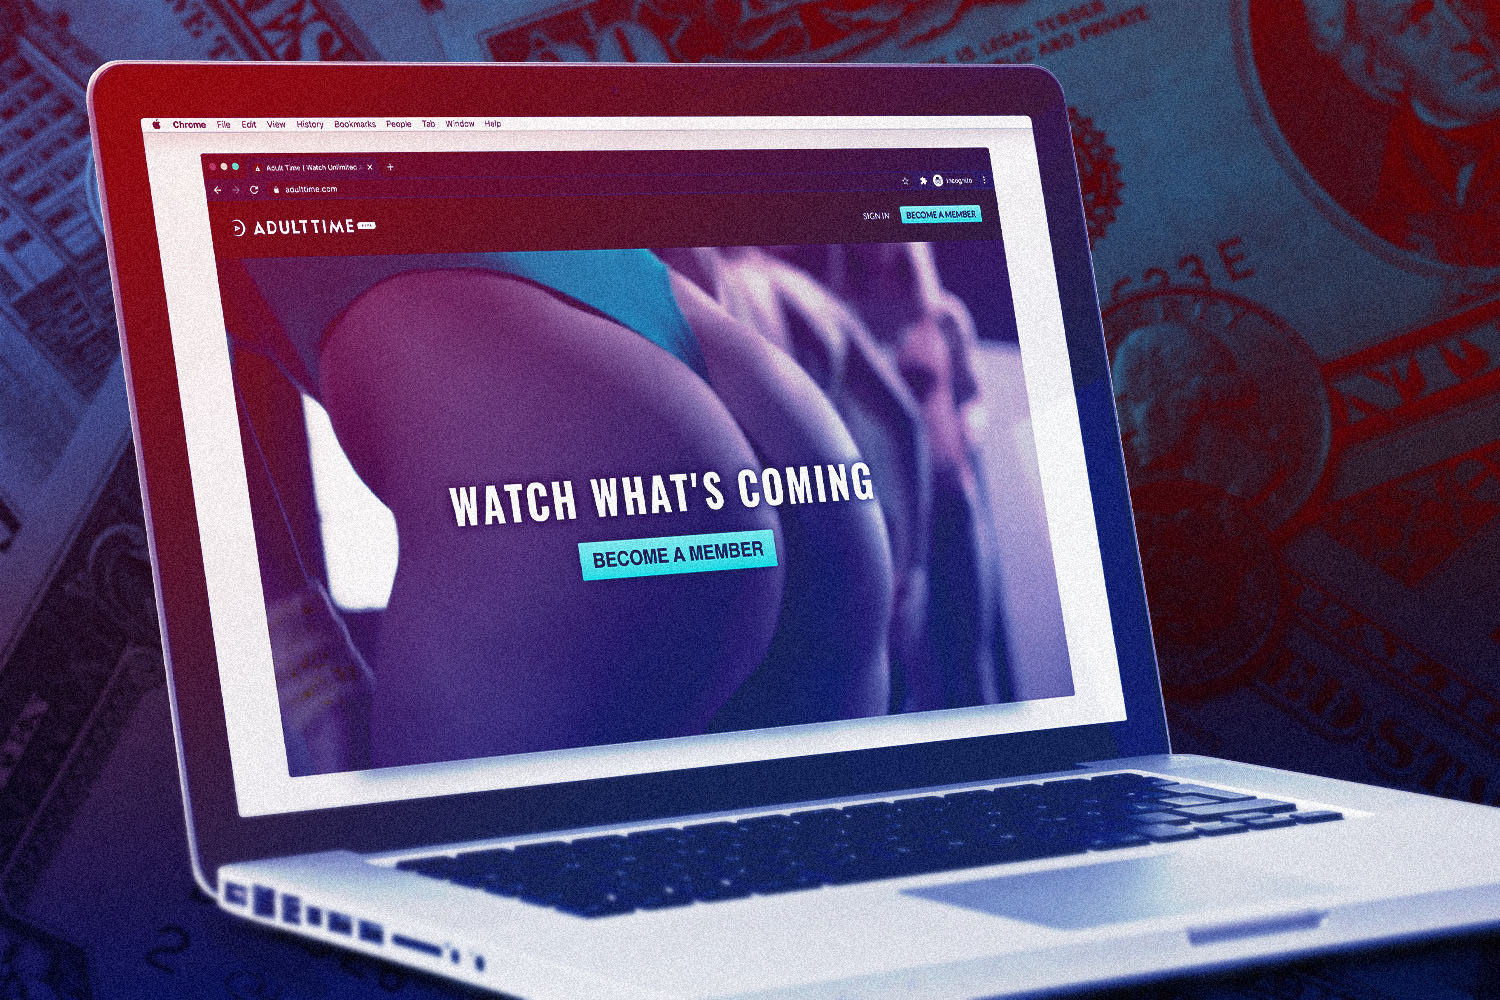 People Watching Porn - How You Should Be Watching Porn, According to Performers | LaptrinhX / News